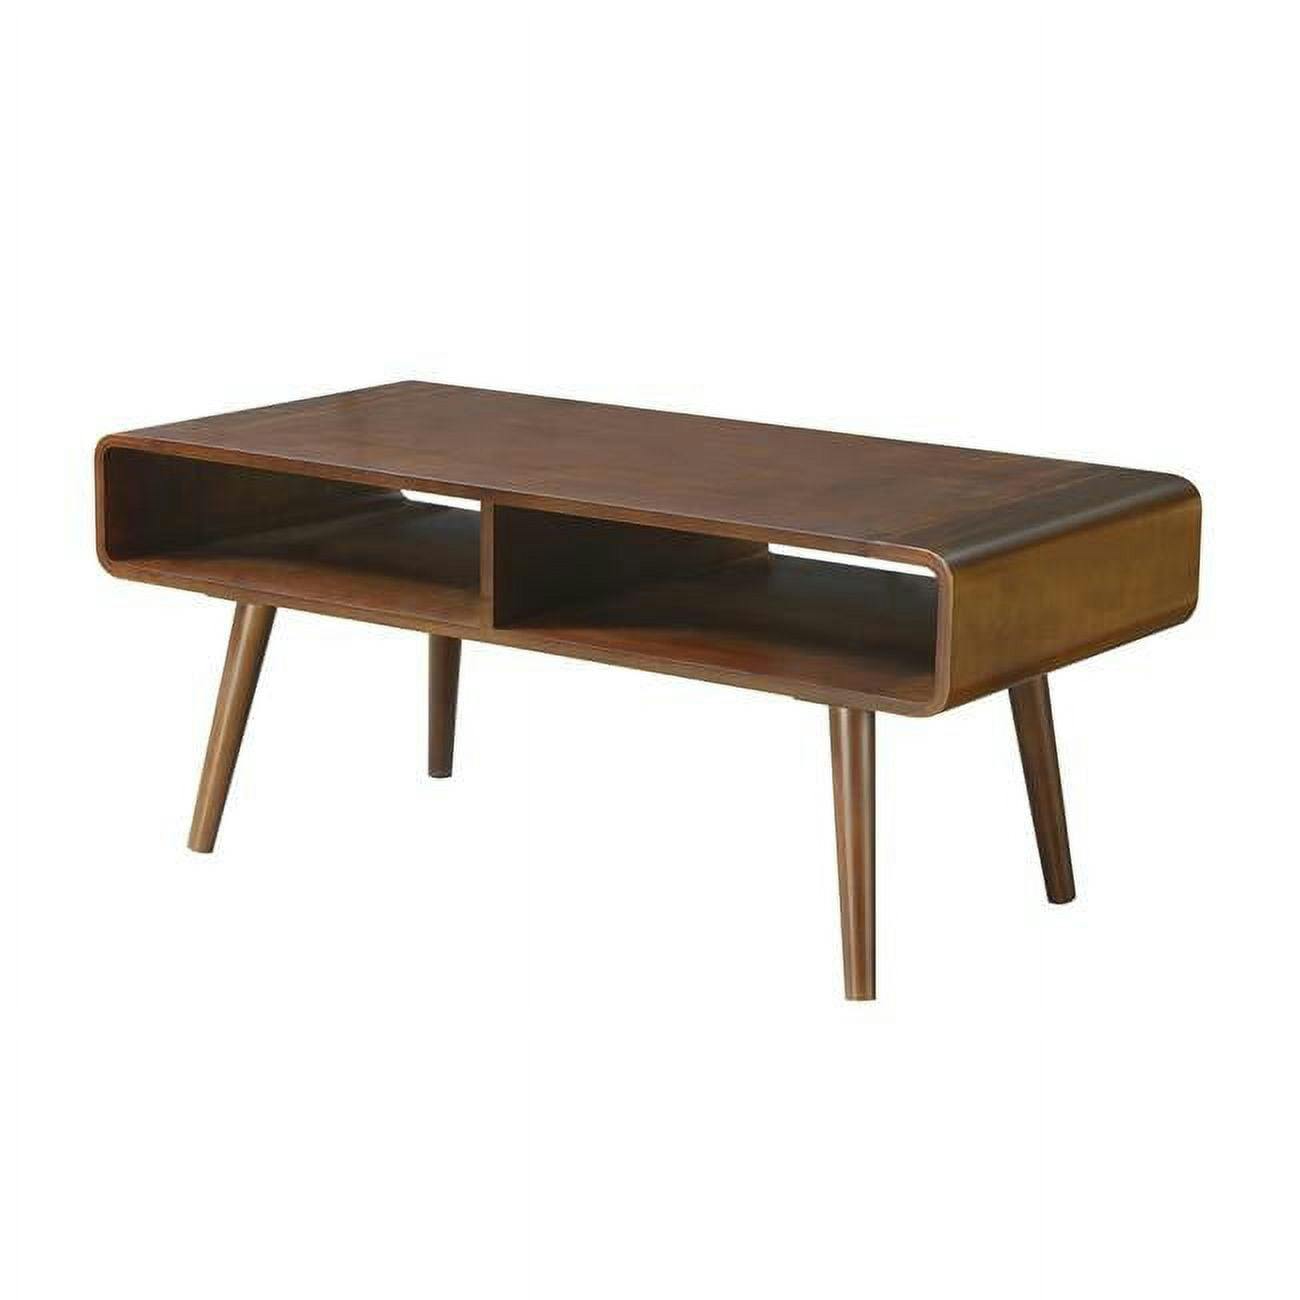 Mid-Century Modern Espresso Rectangular Coffee Table with Open Cubbies